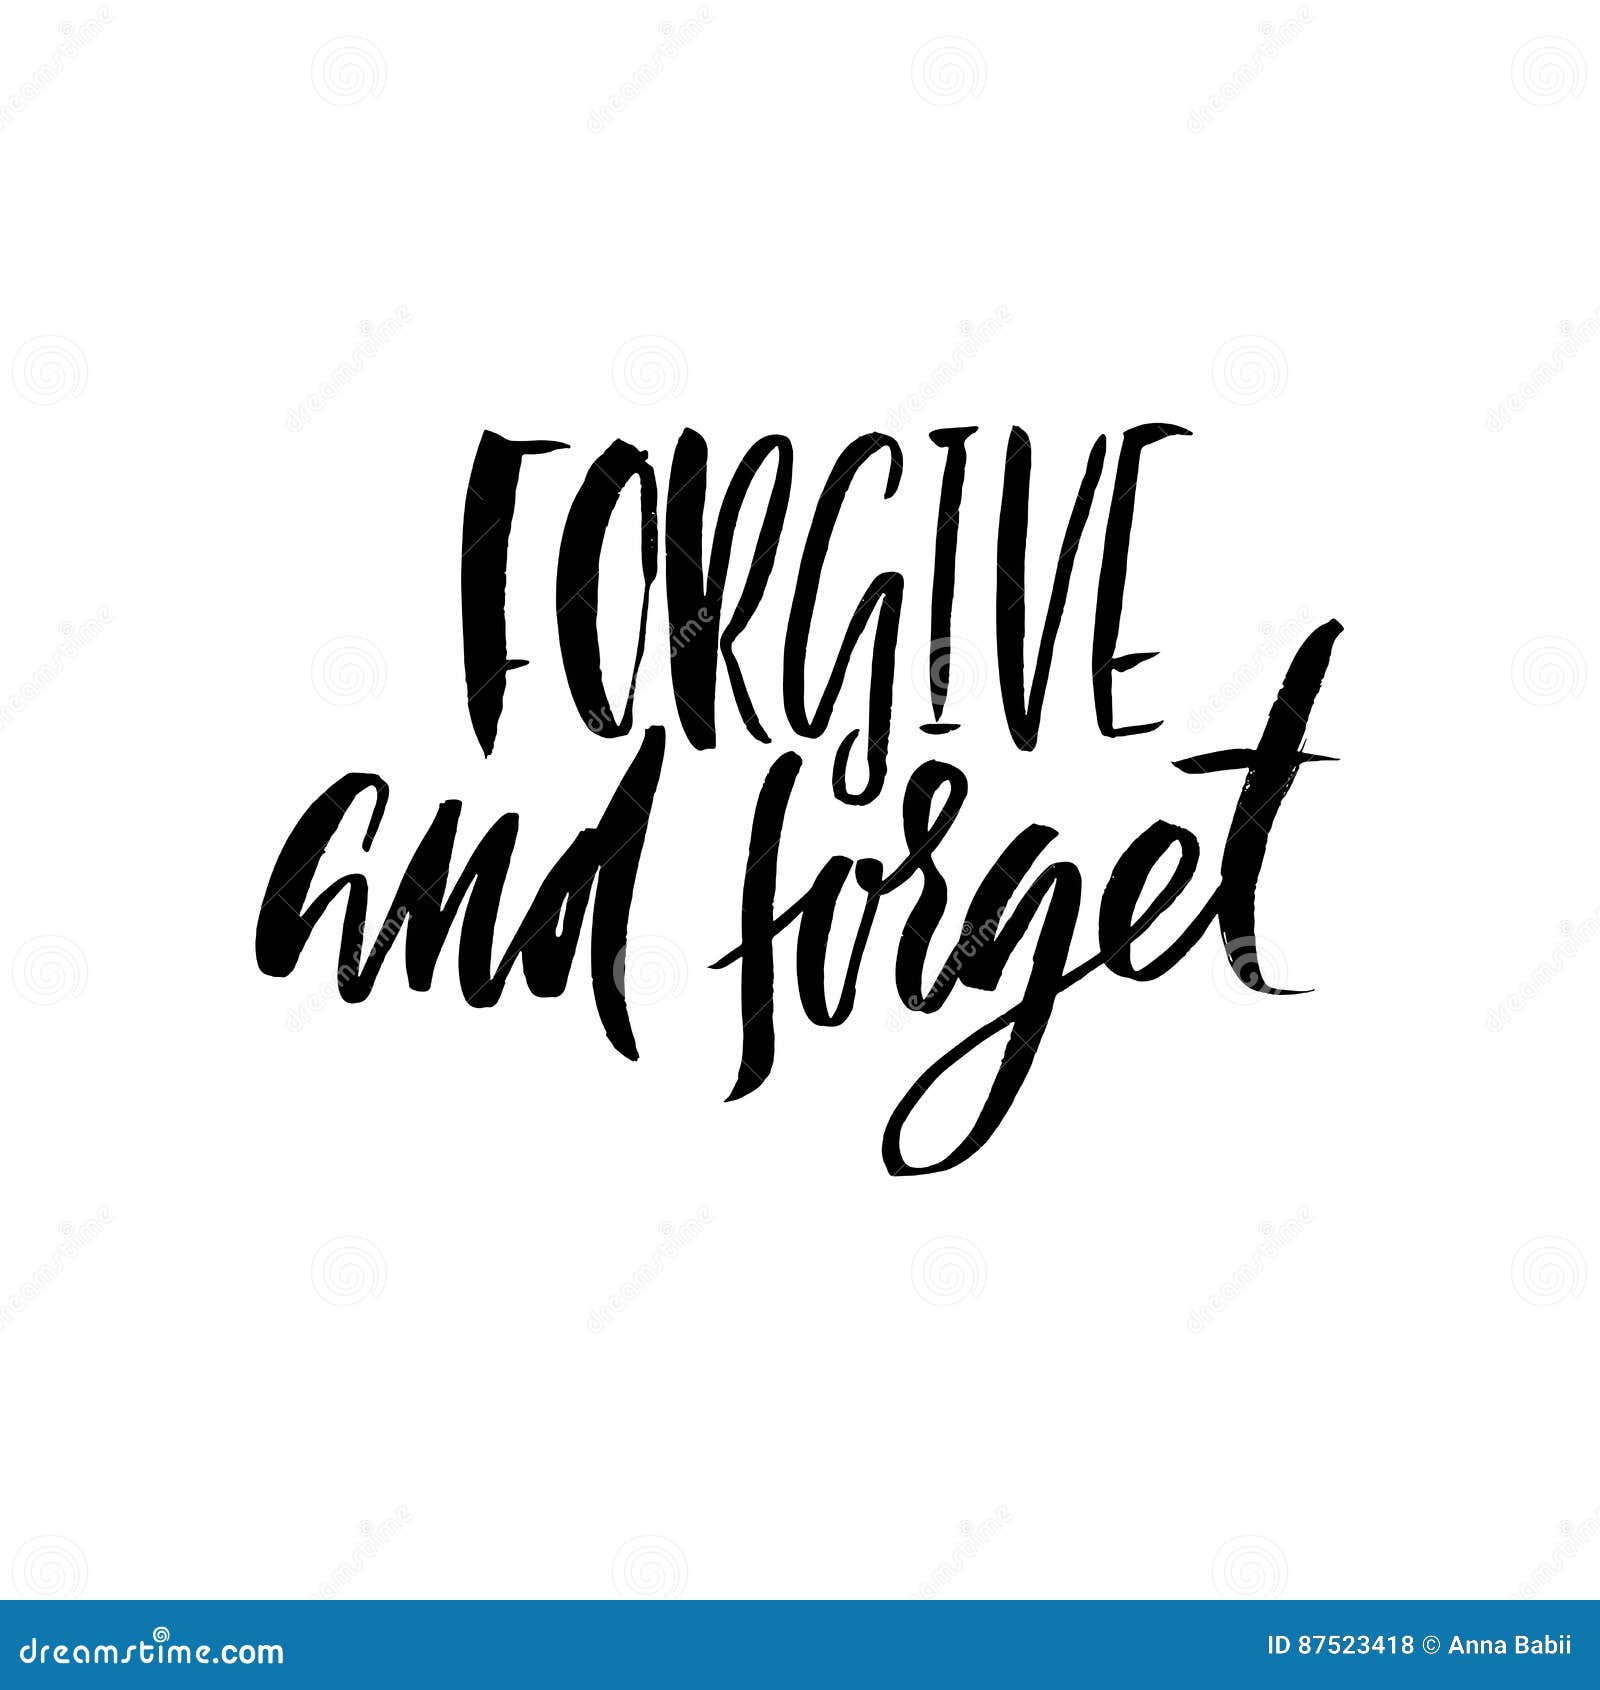 Forgive And Forget Hand Drawn Lettering Proverb Vector Typography